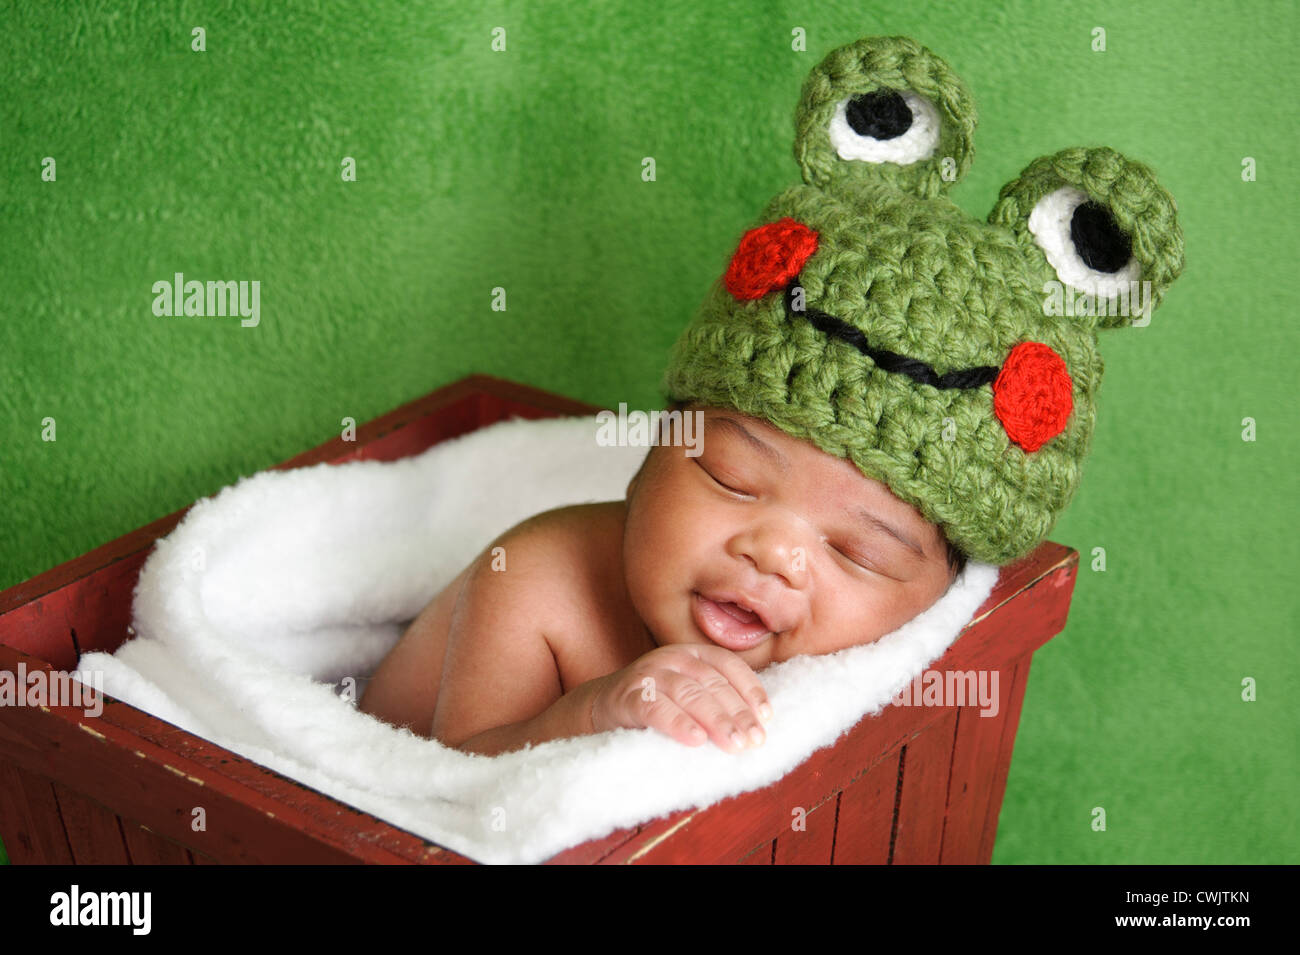 13 day old smiling newborn baby boy wearing a green crocheted frog hat. He is sleeping in a red wooden box. Stock Photo